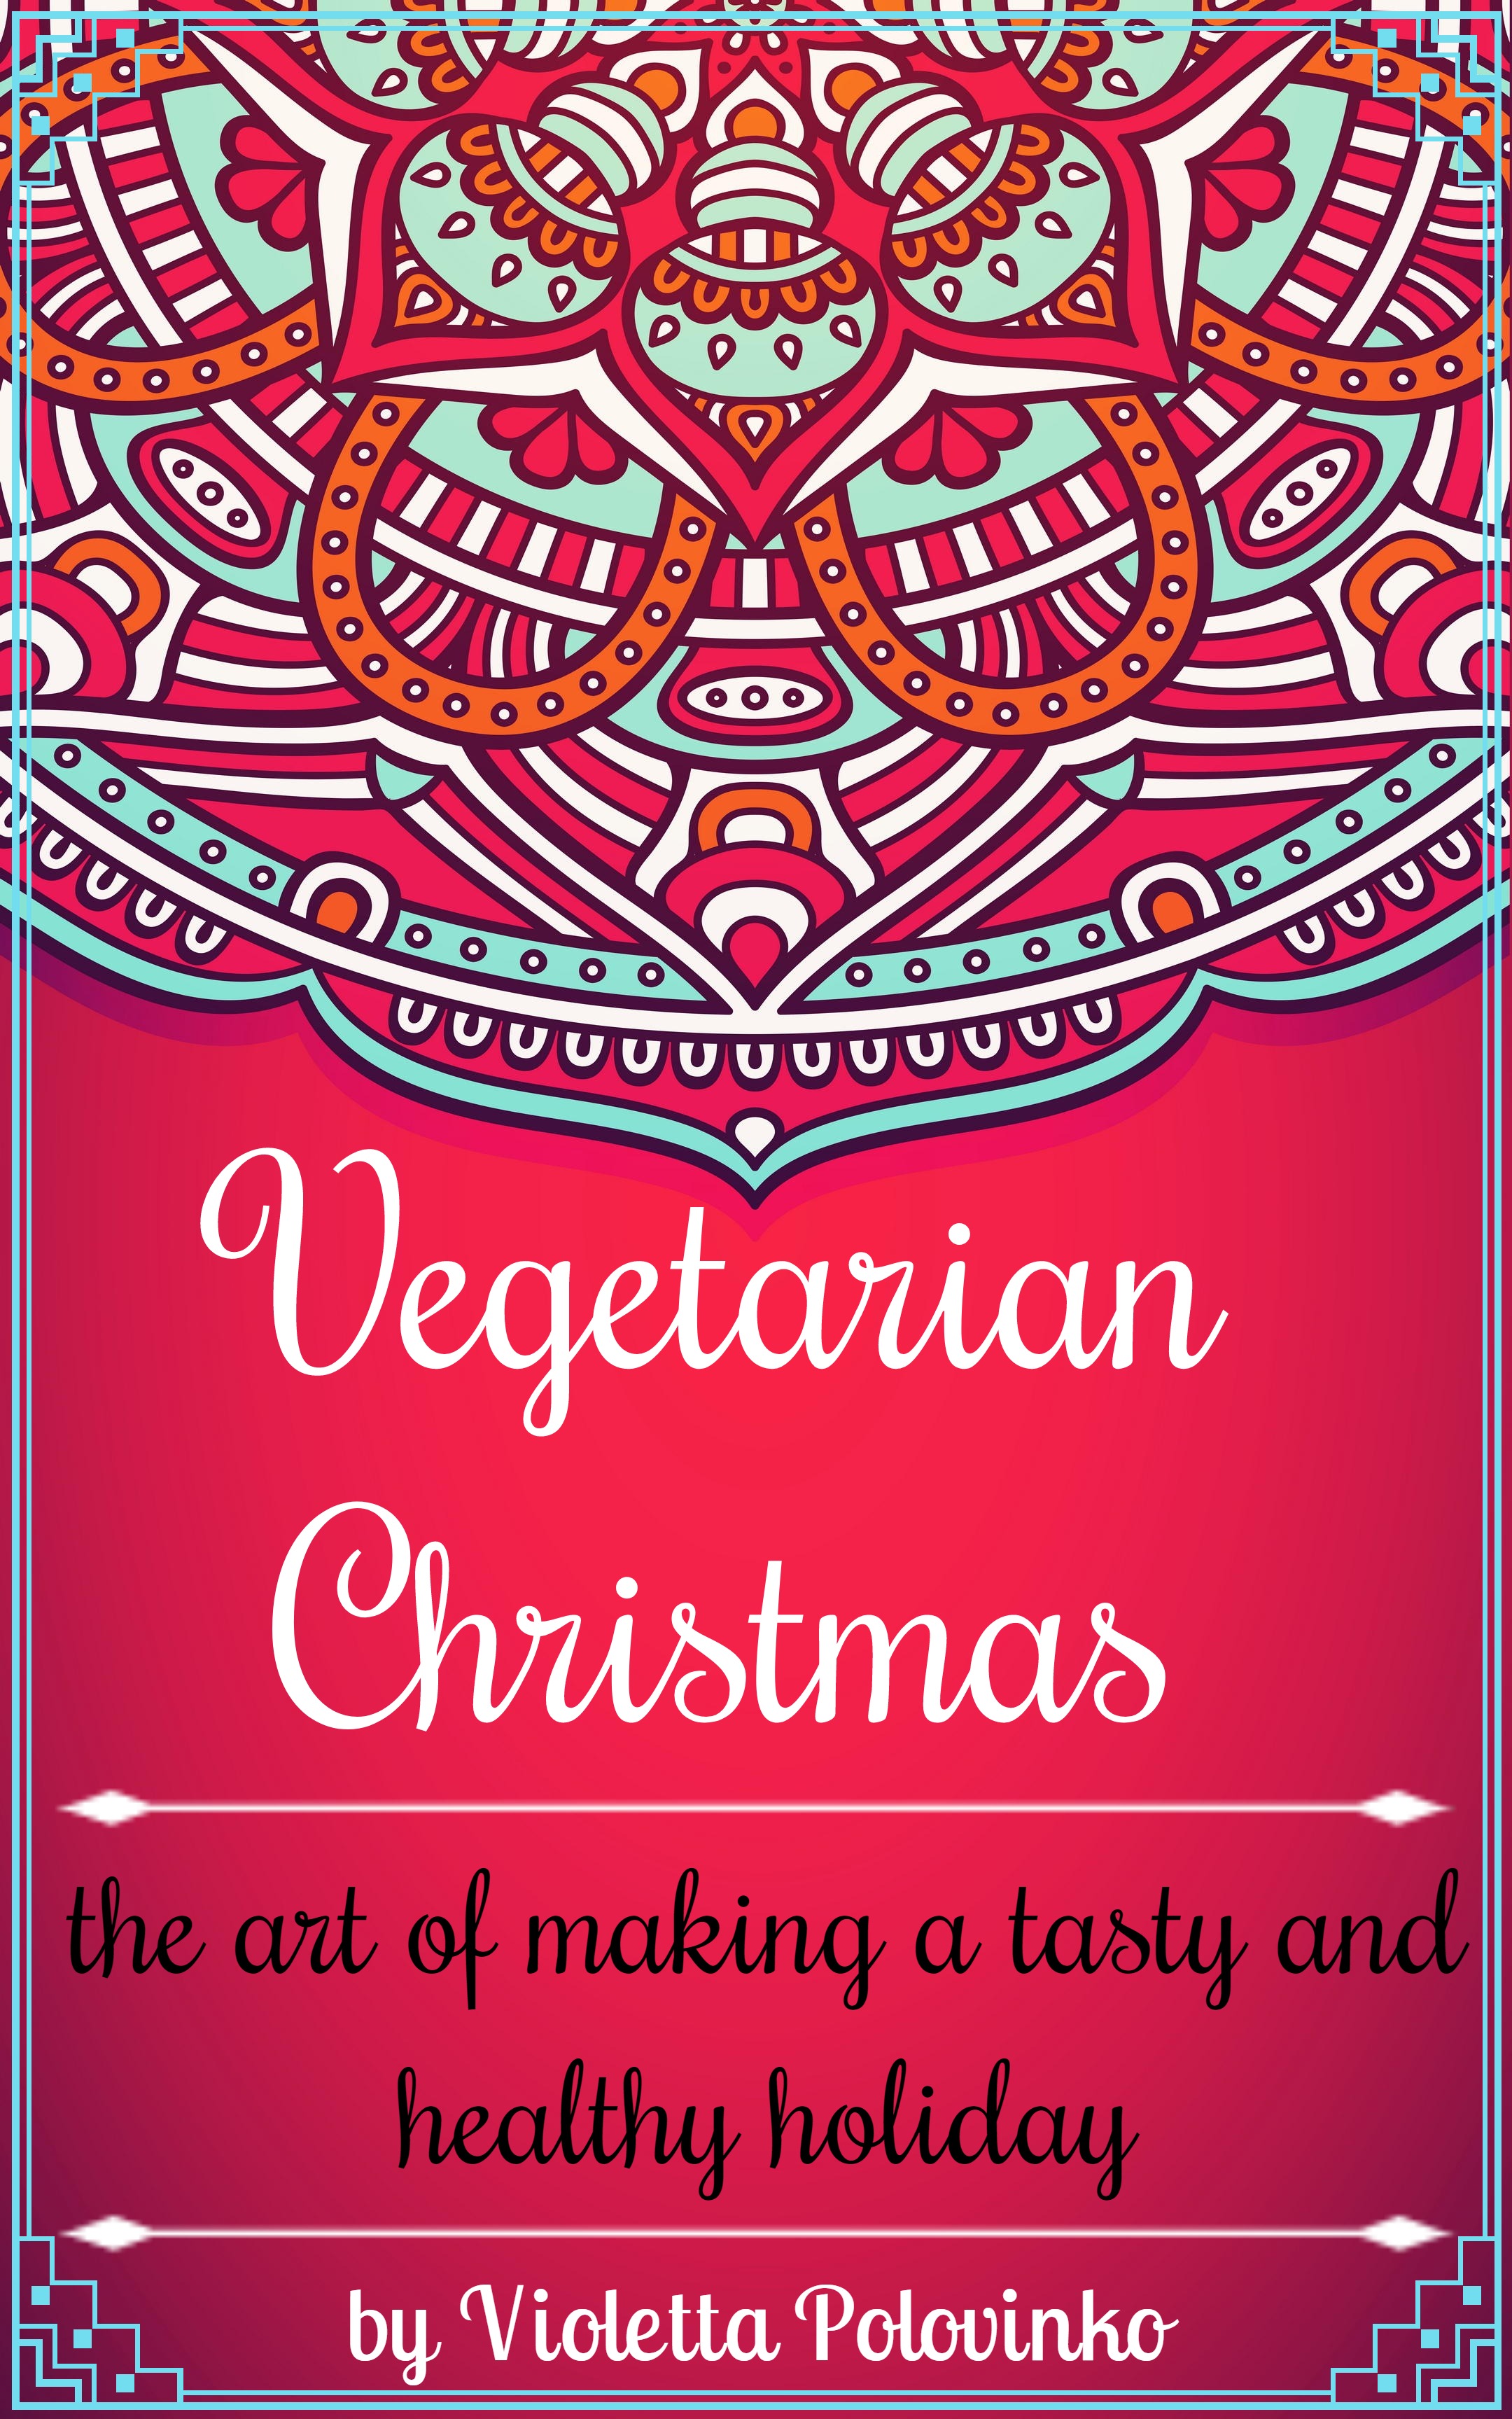 FREE: Vegetarian Christmas: the art of making a tasty and healthy holiday by Violetta Polovinko